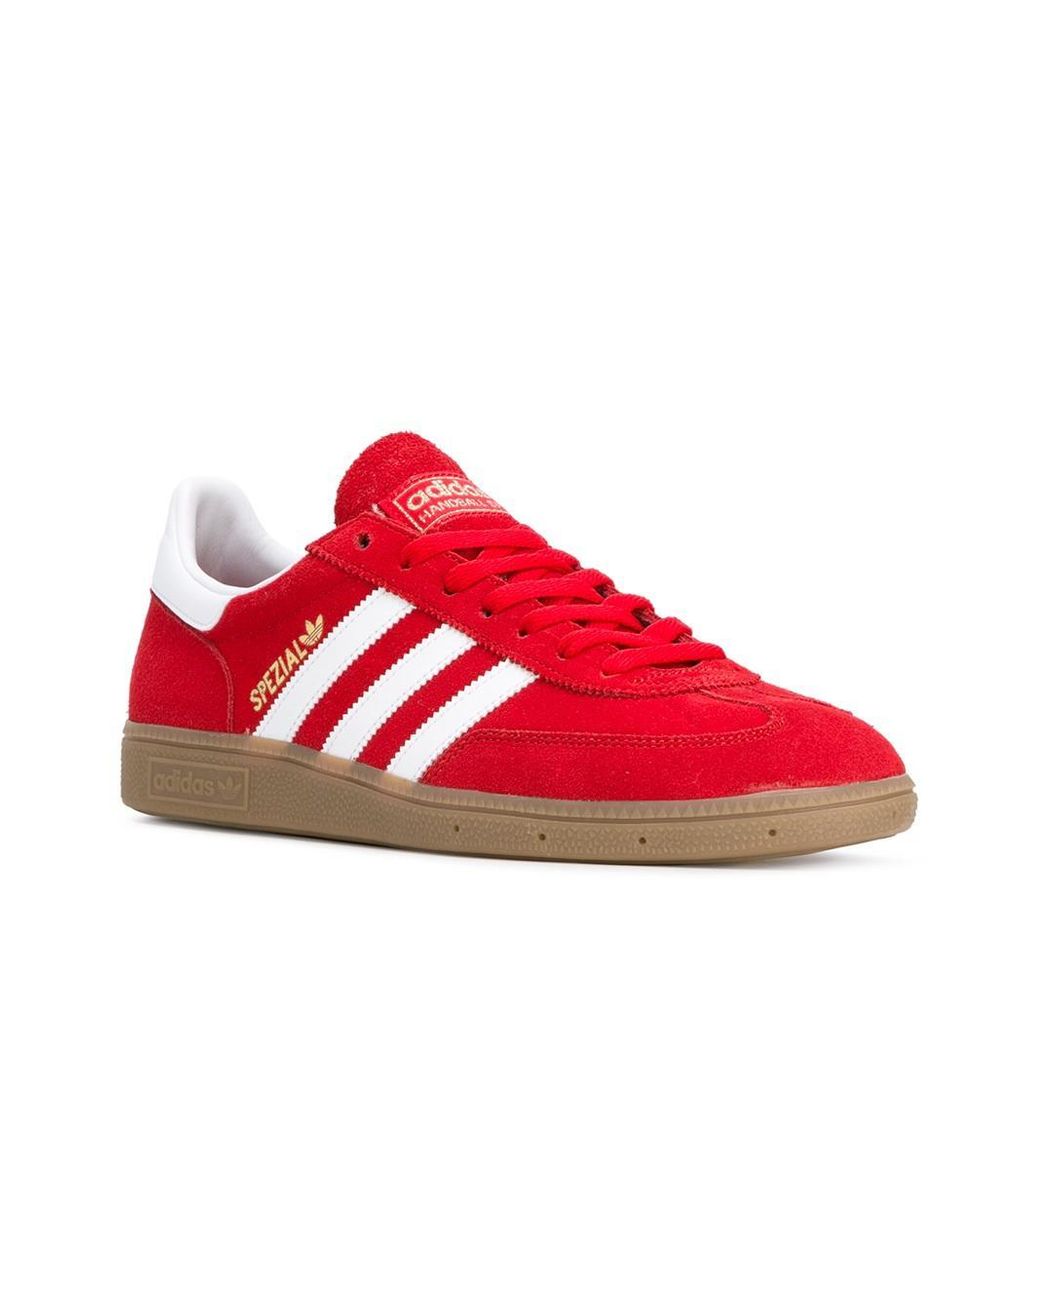 adidas Originals Leather 'handball Spezial' Sneakers in Red for Men | Lyst